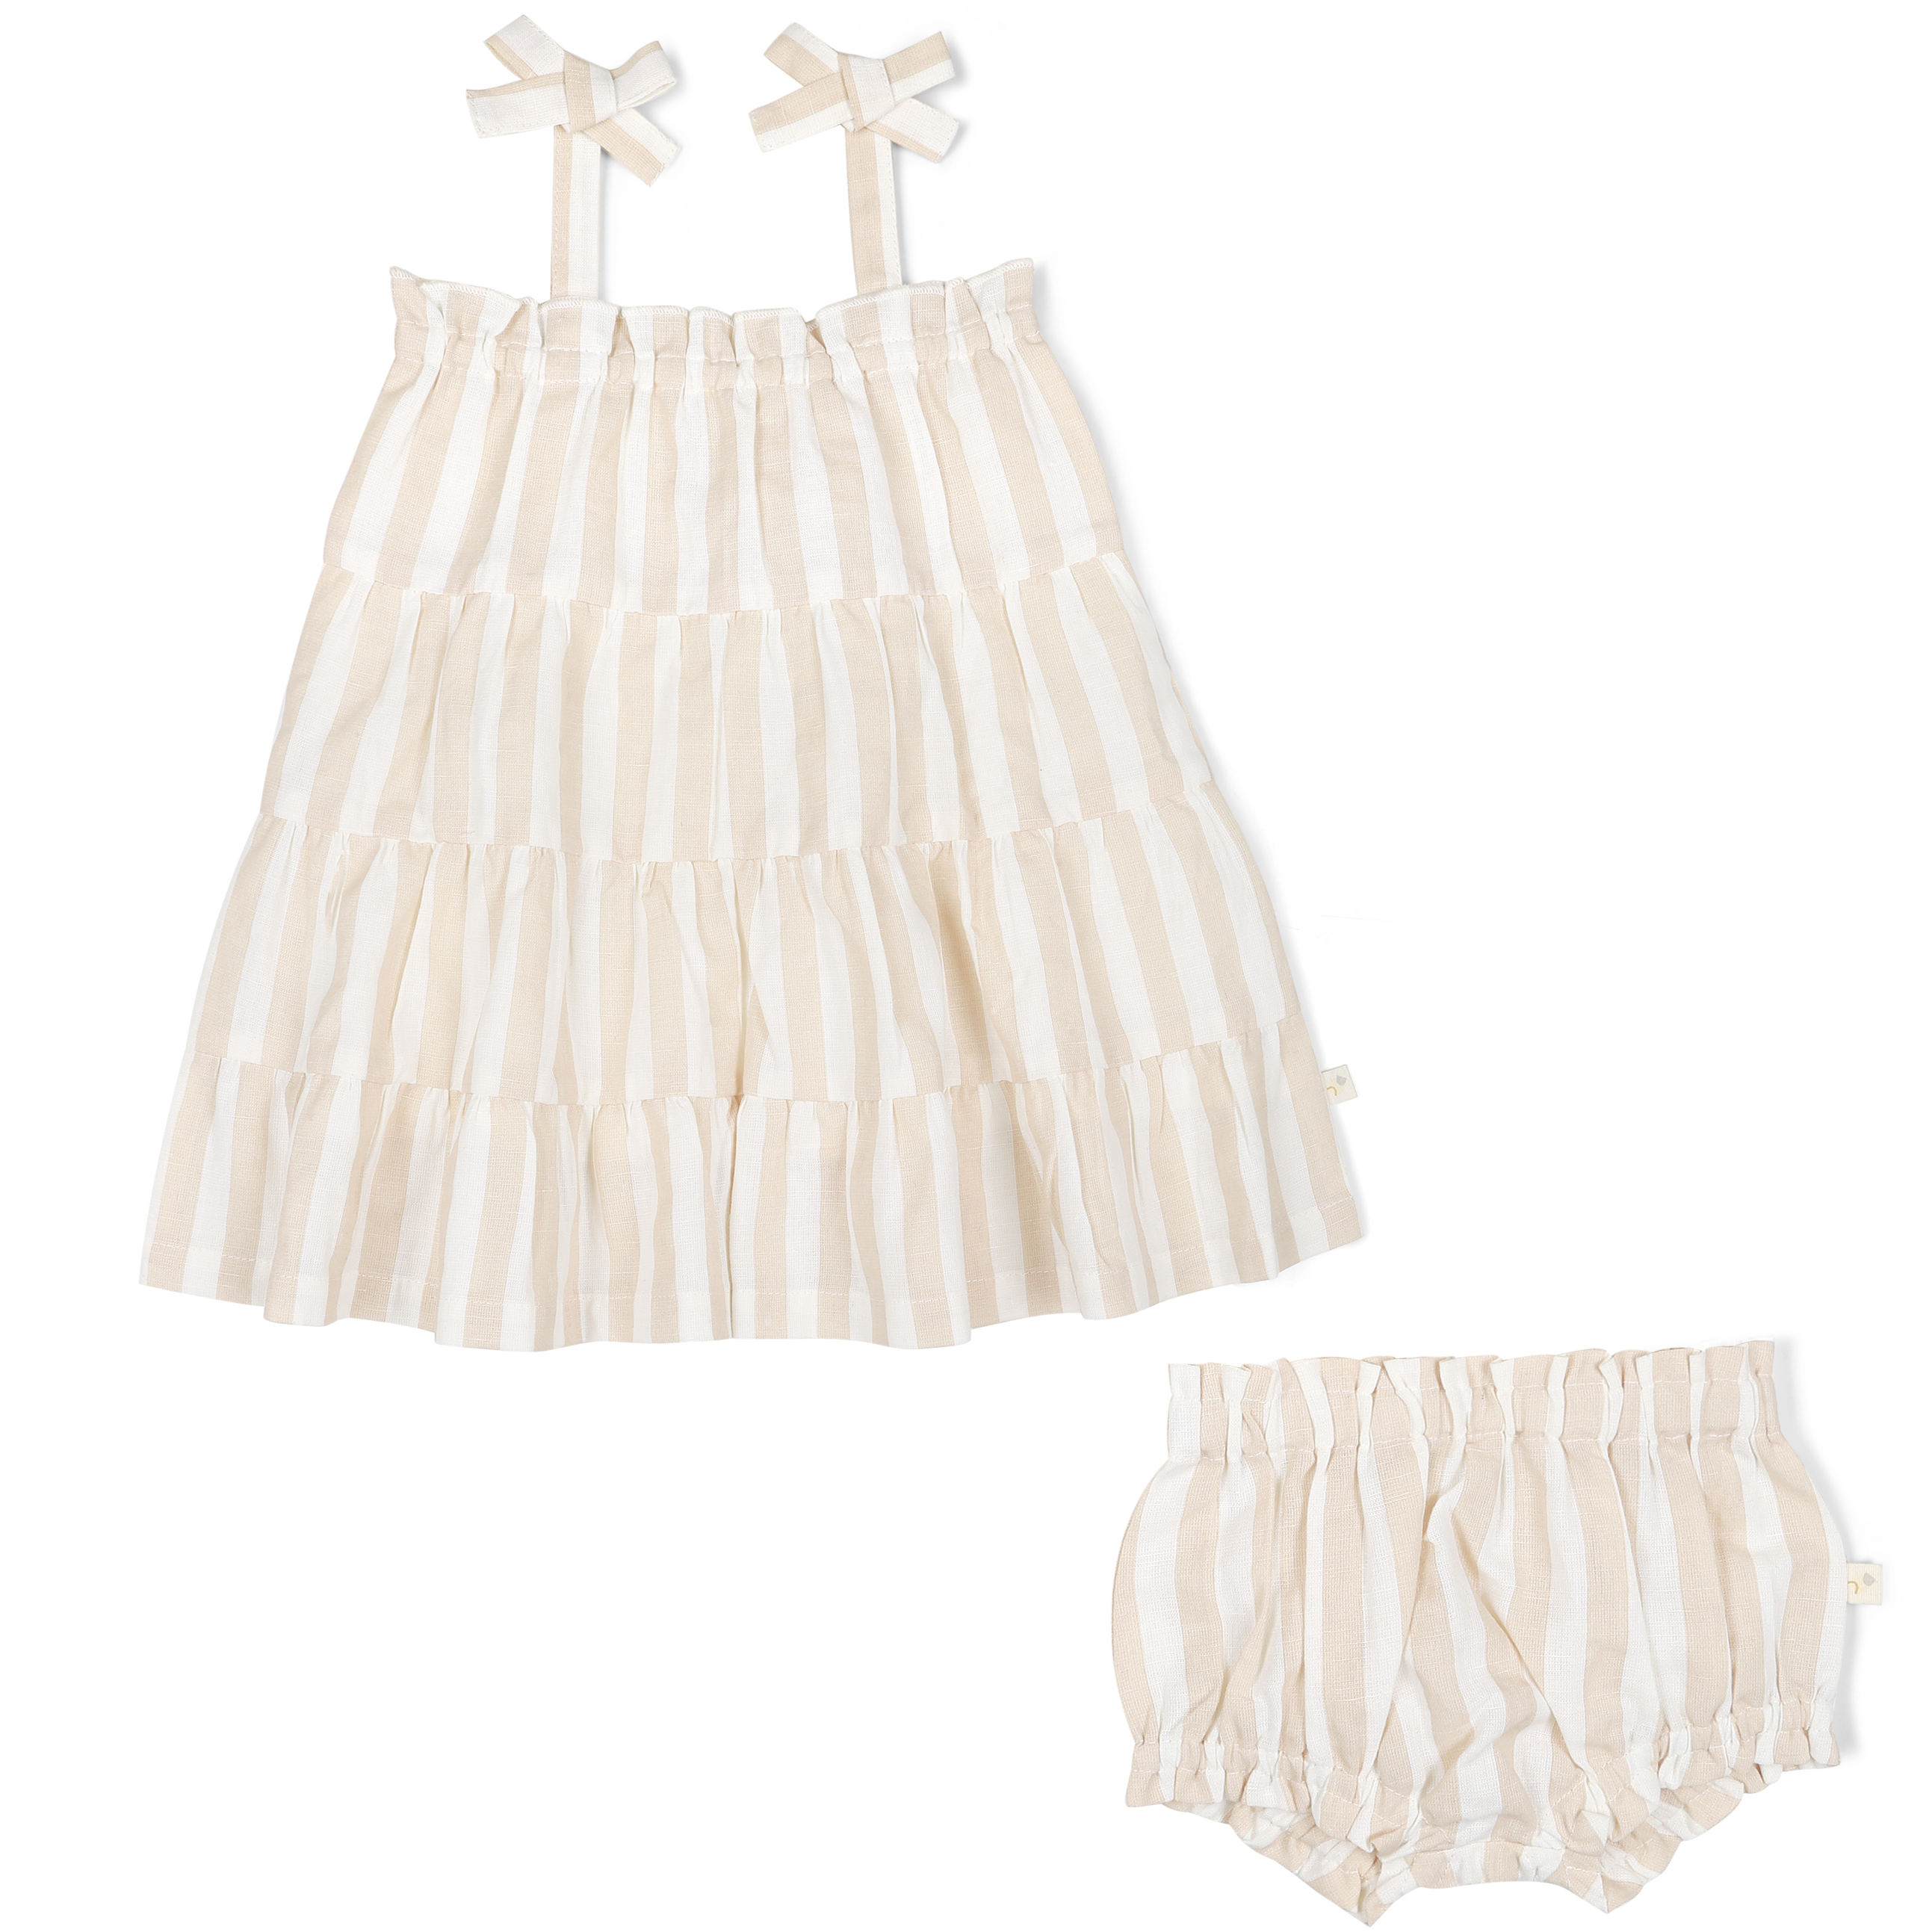 A Organic Linen Tiered Strap Dress - Beige Stripes baby's dress with ruffle tiers, accompanied by matching bloomers and a pair of bow-shaped hair clips, displayed against a white background. Brand Name: Makemake Organics